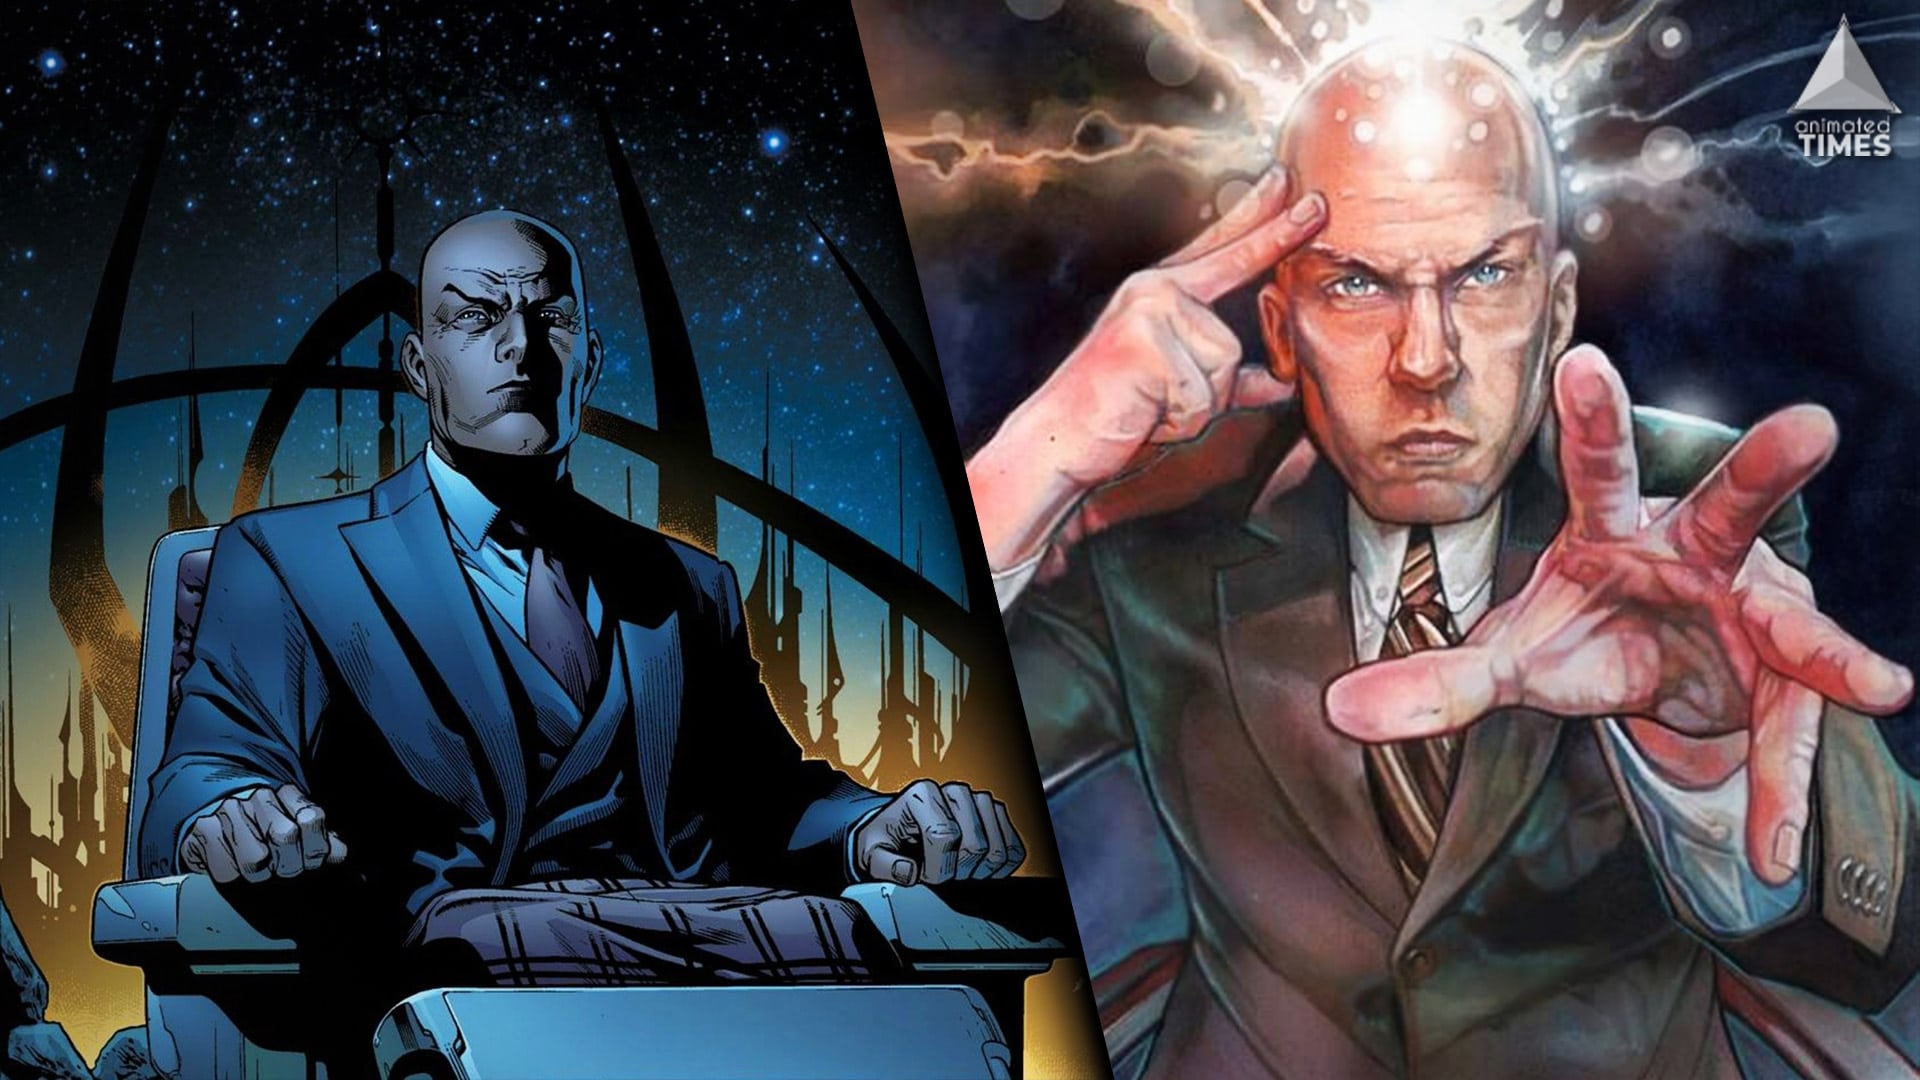 5 Professor X Powers That Prove He’s Too Powerful For the MCU